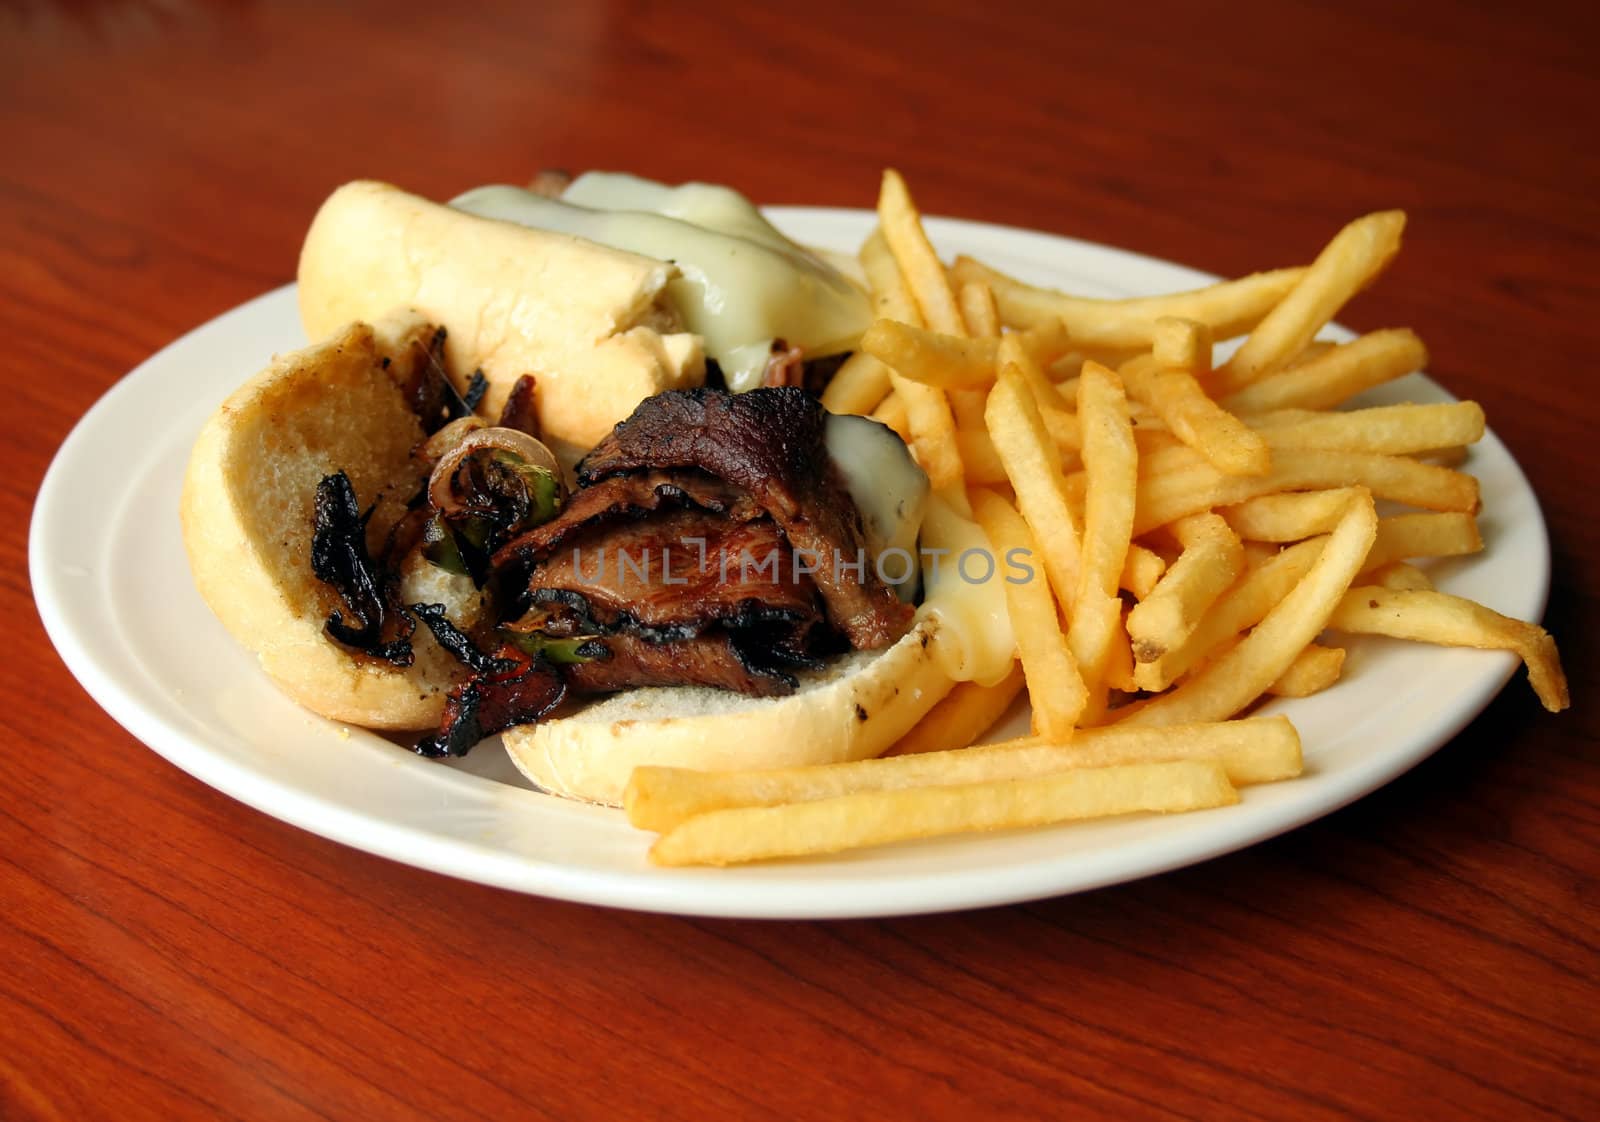 cheese steak with french fries on white plate and wood background
